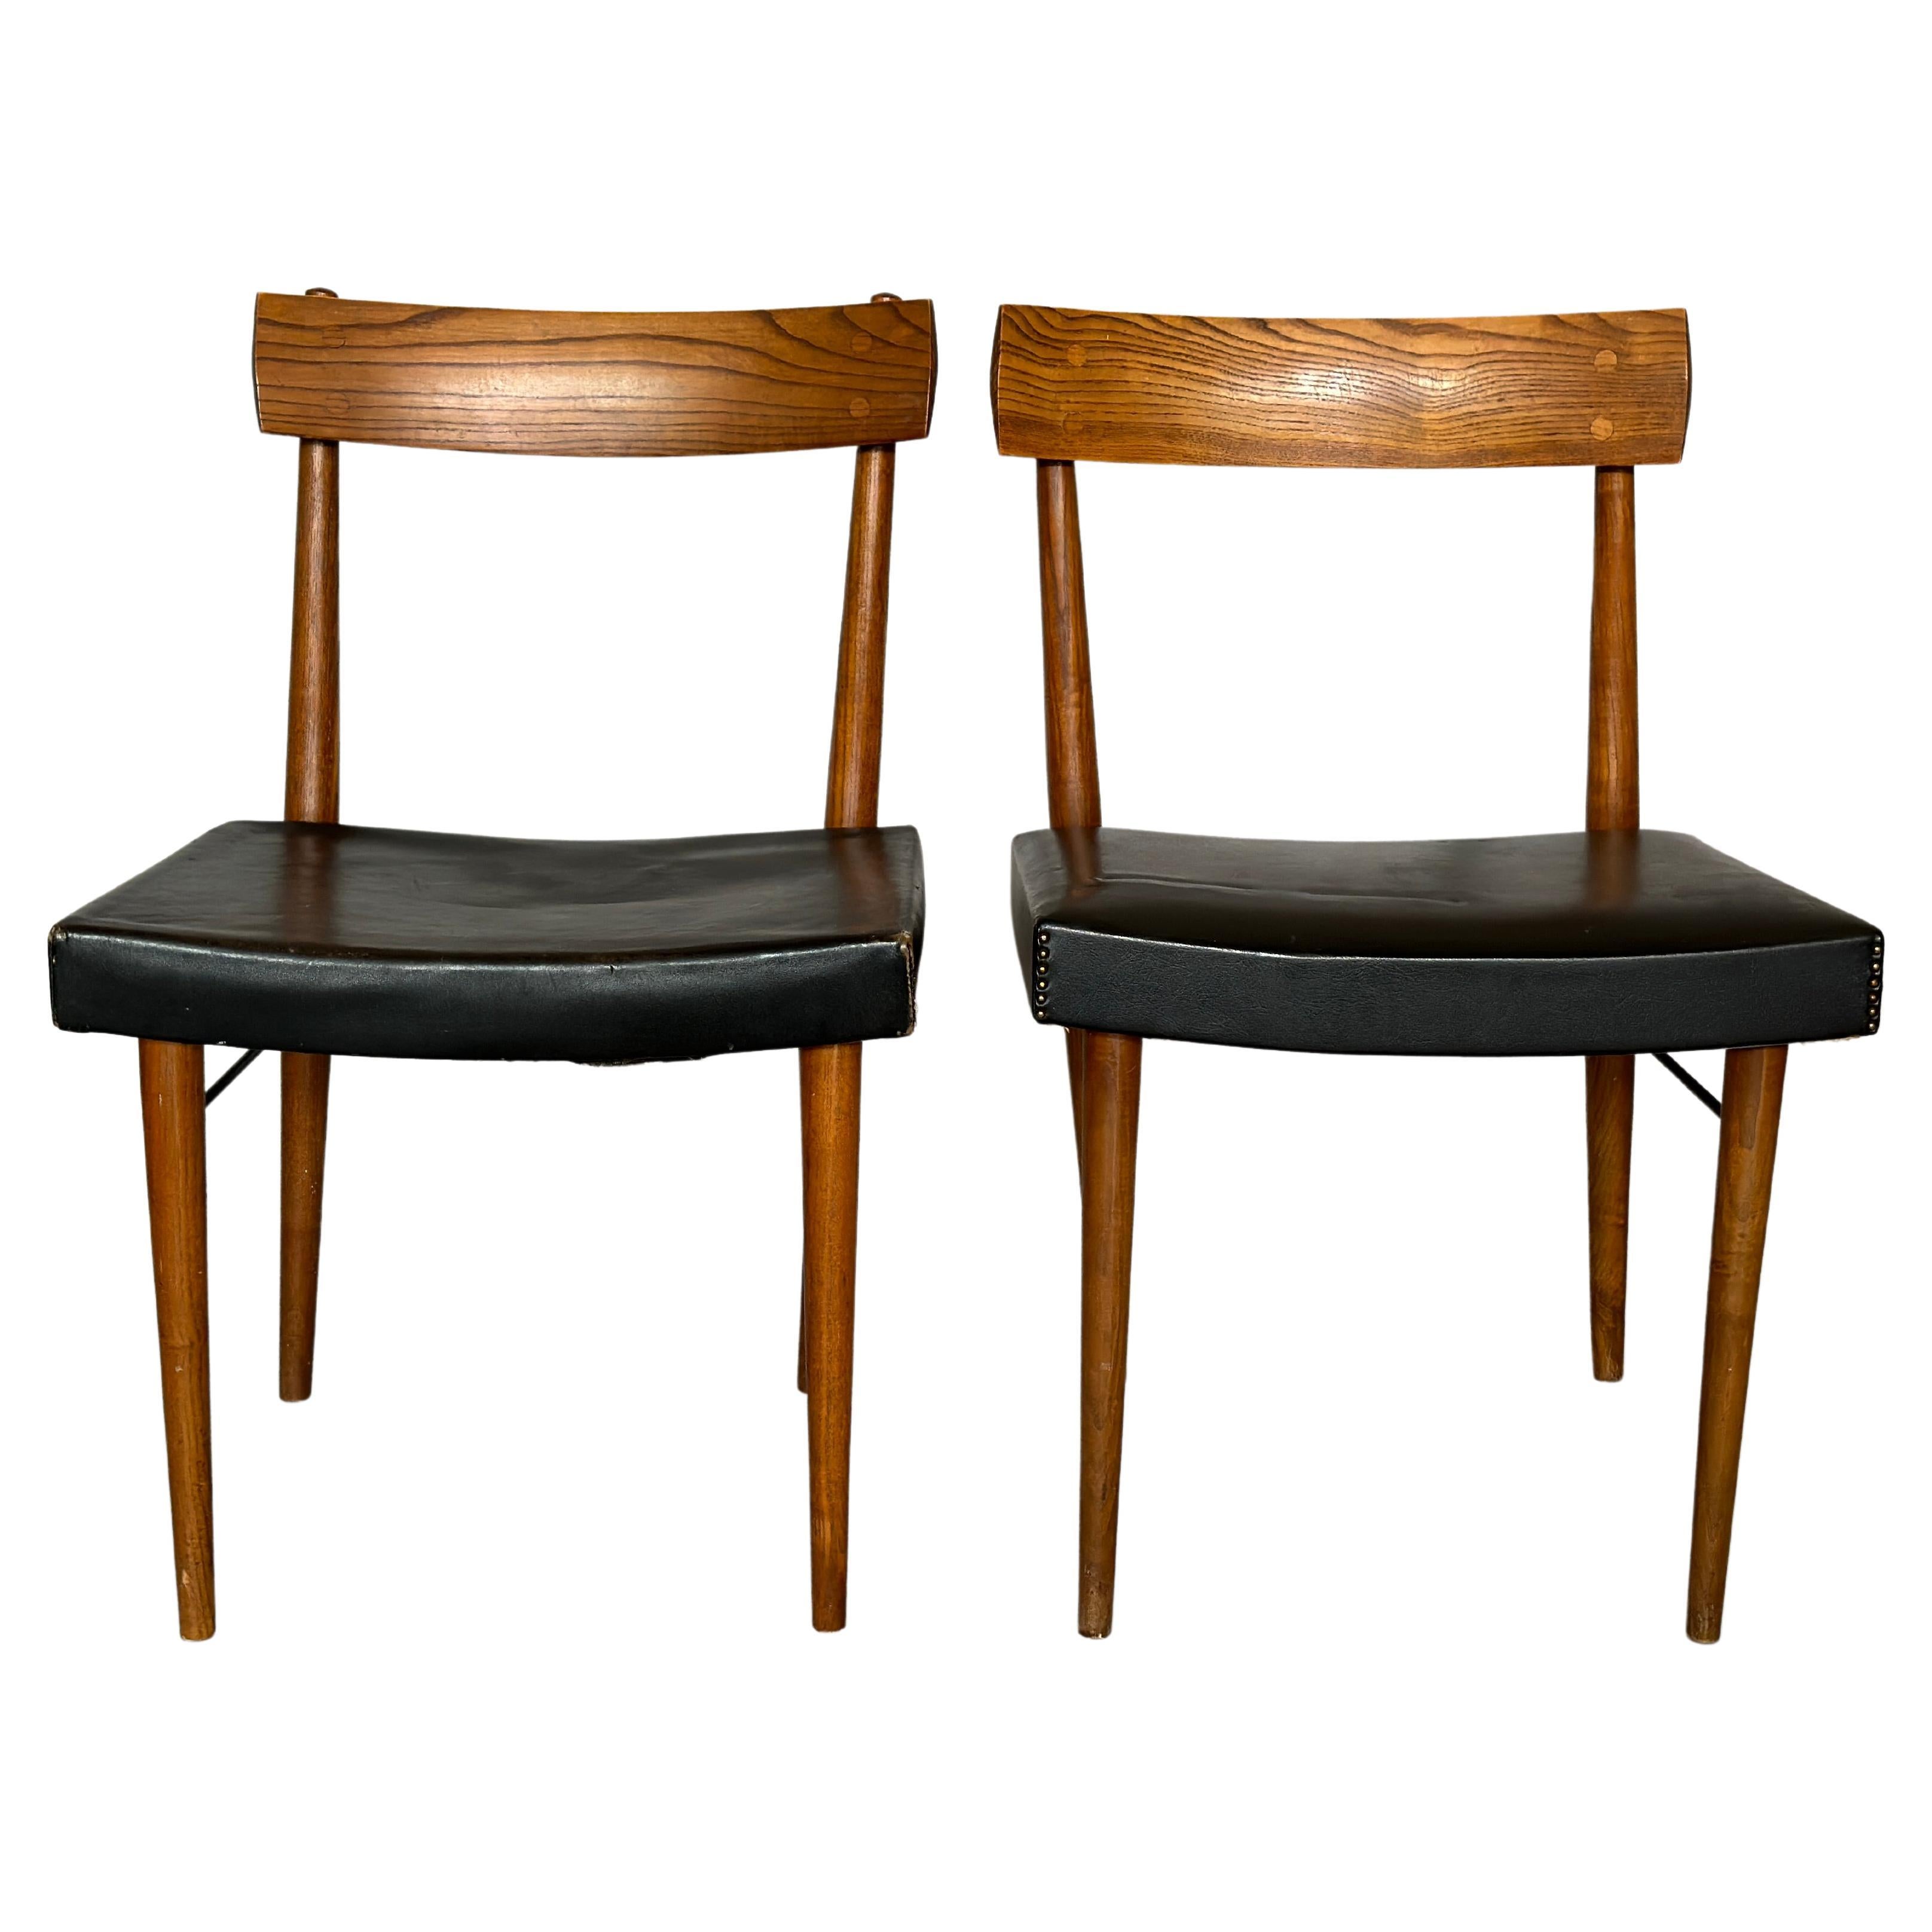 Danish Rosewood Dining Chairs, 1950s